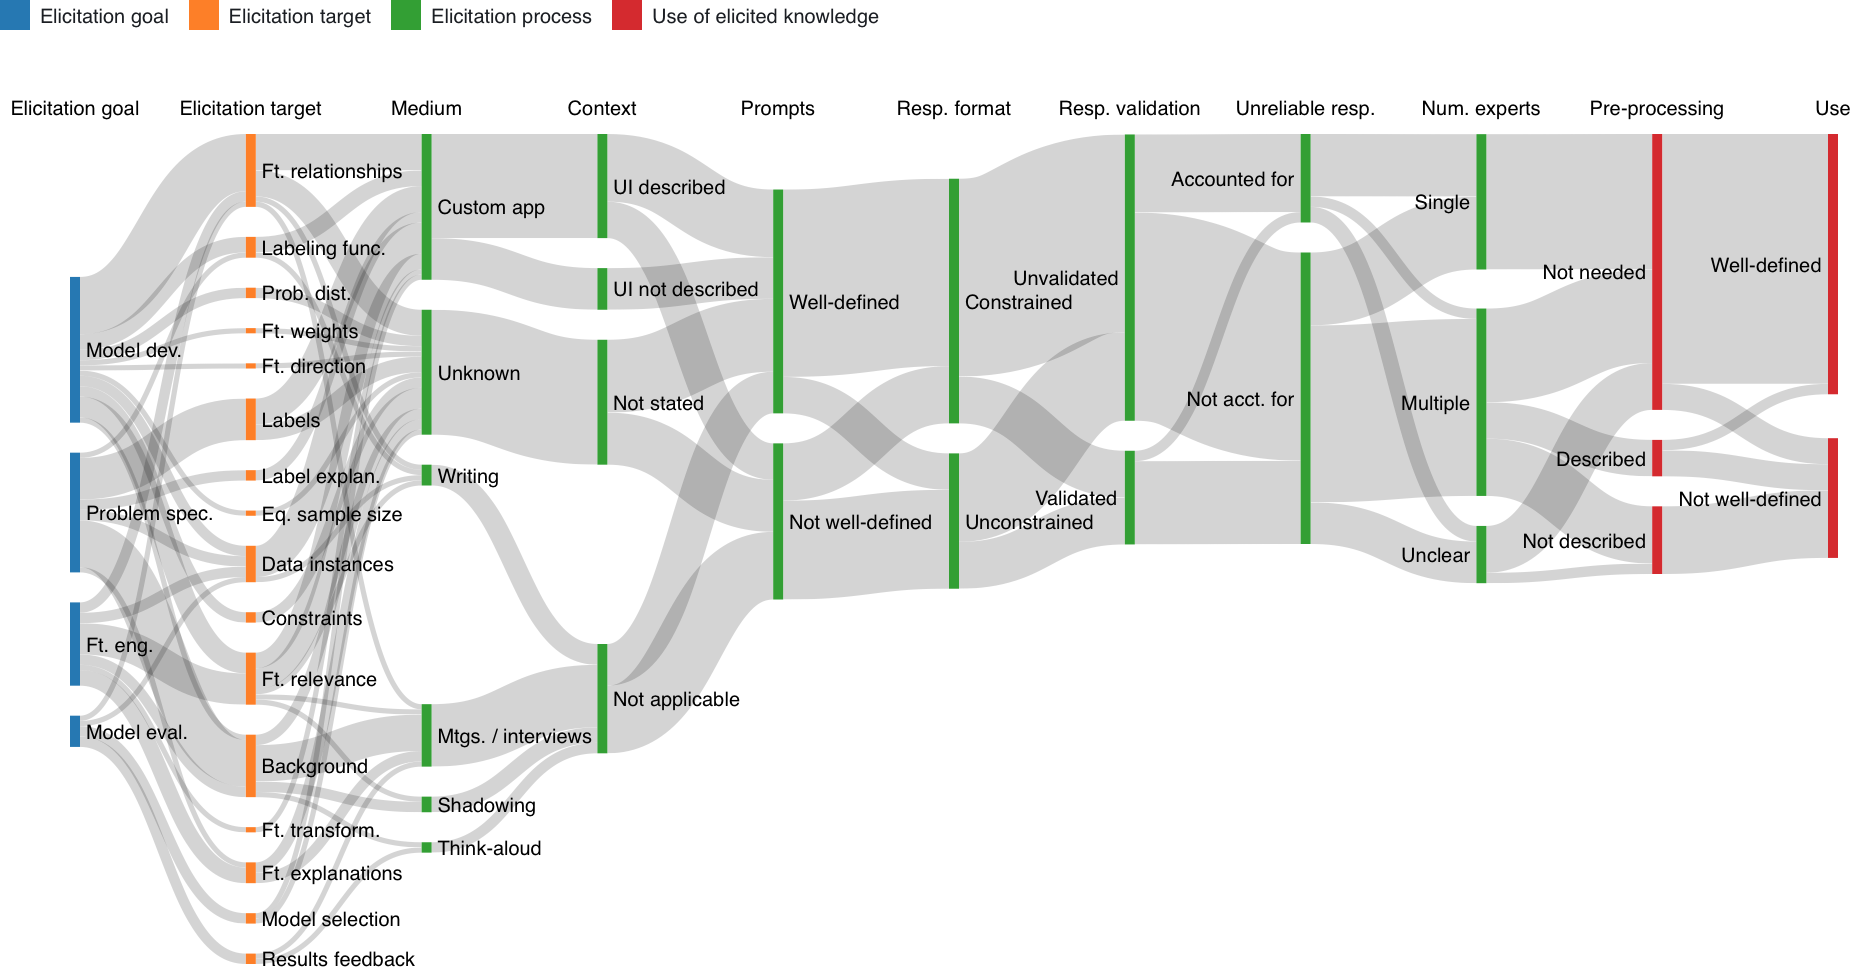 A Sankey diagram visualizing the results of the survey paper.